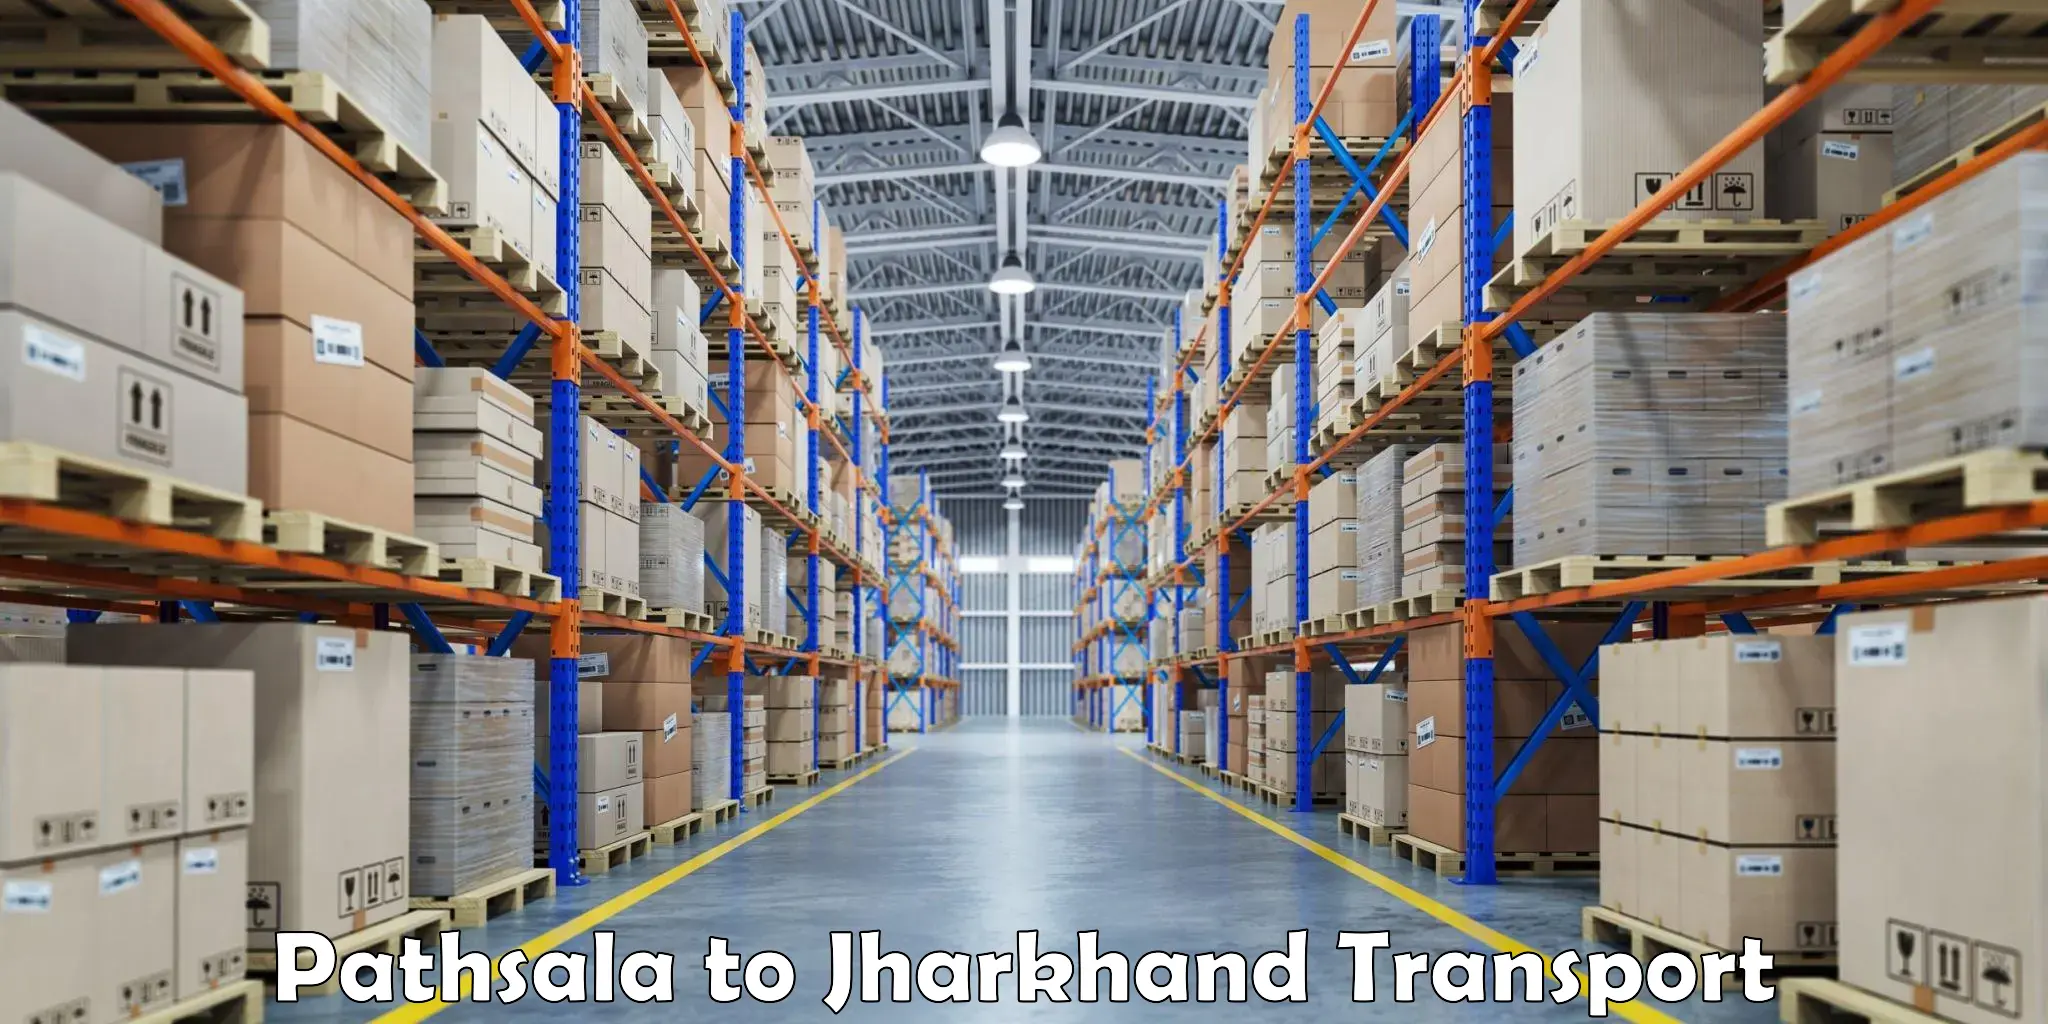 Truck transport companies in India Pathsala to Chaibasa